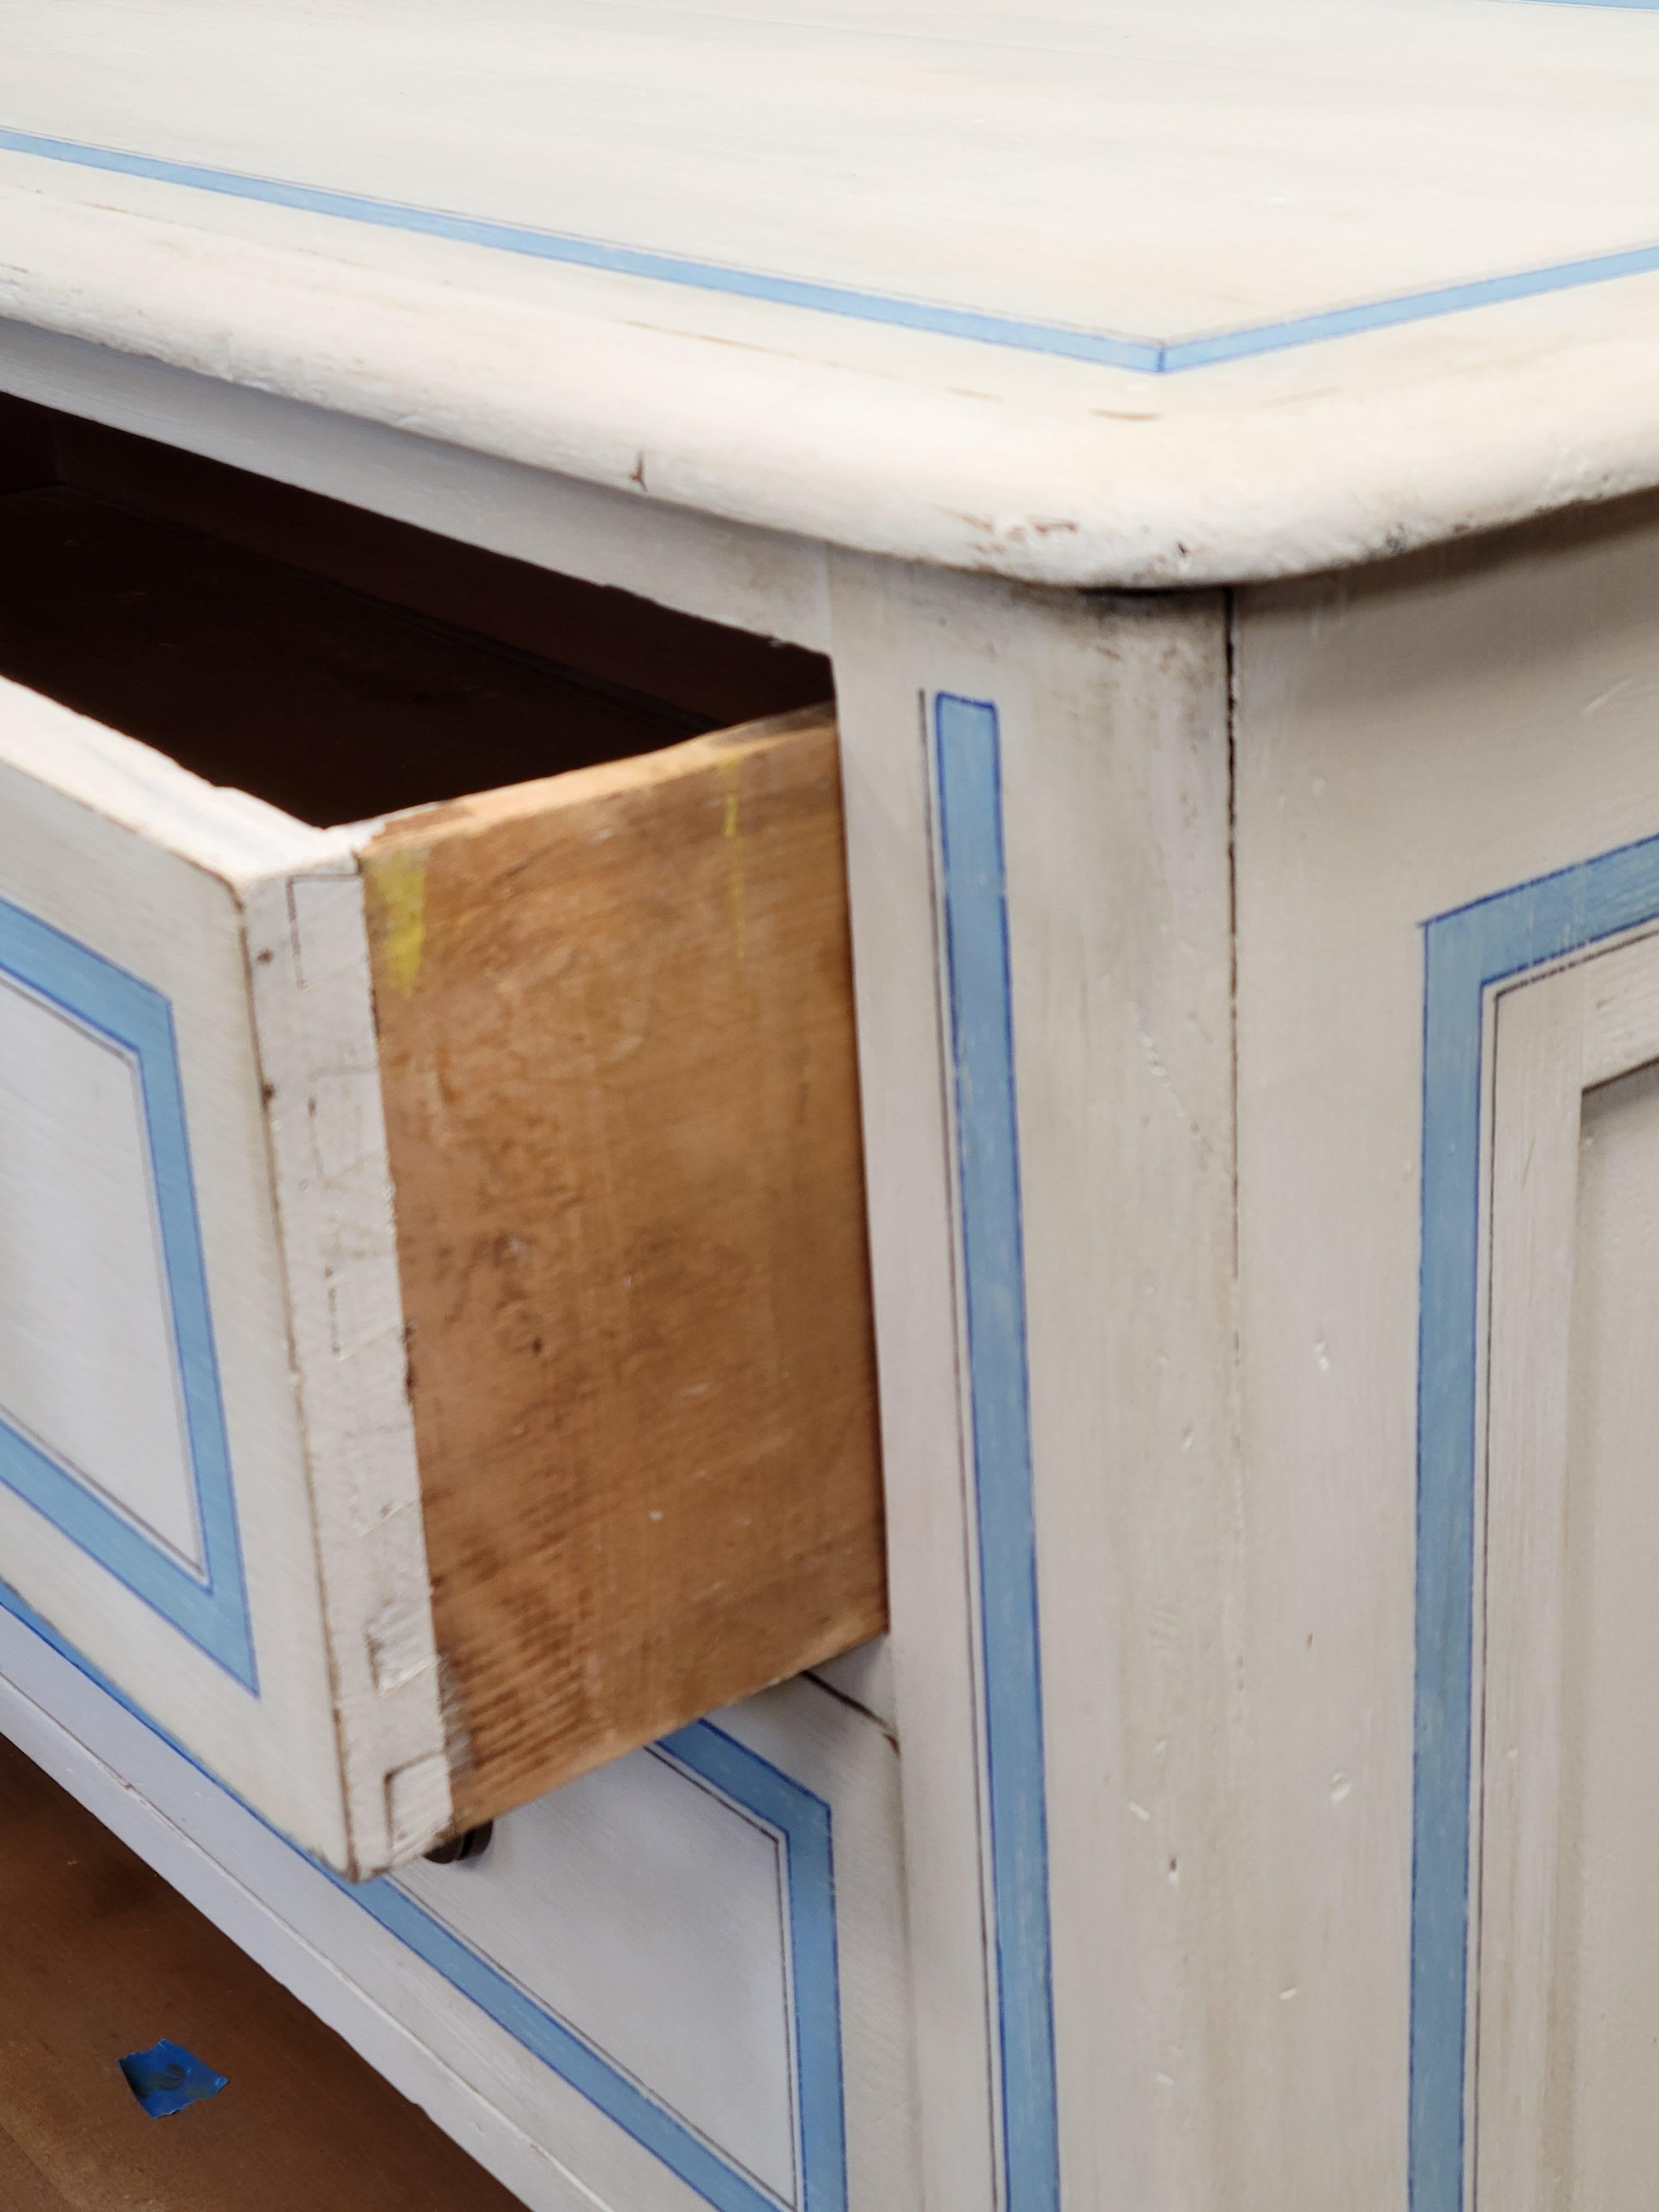 Neoclassical Antique Pine Chest of Drawers Painted With Blue French Line Motif on White